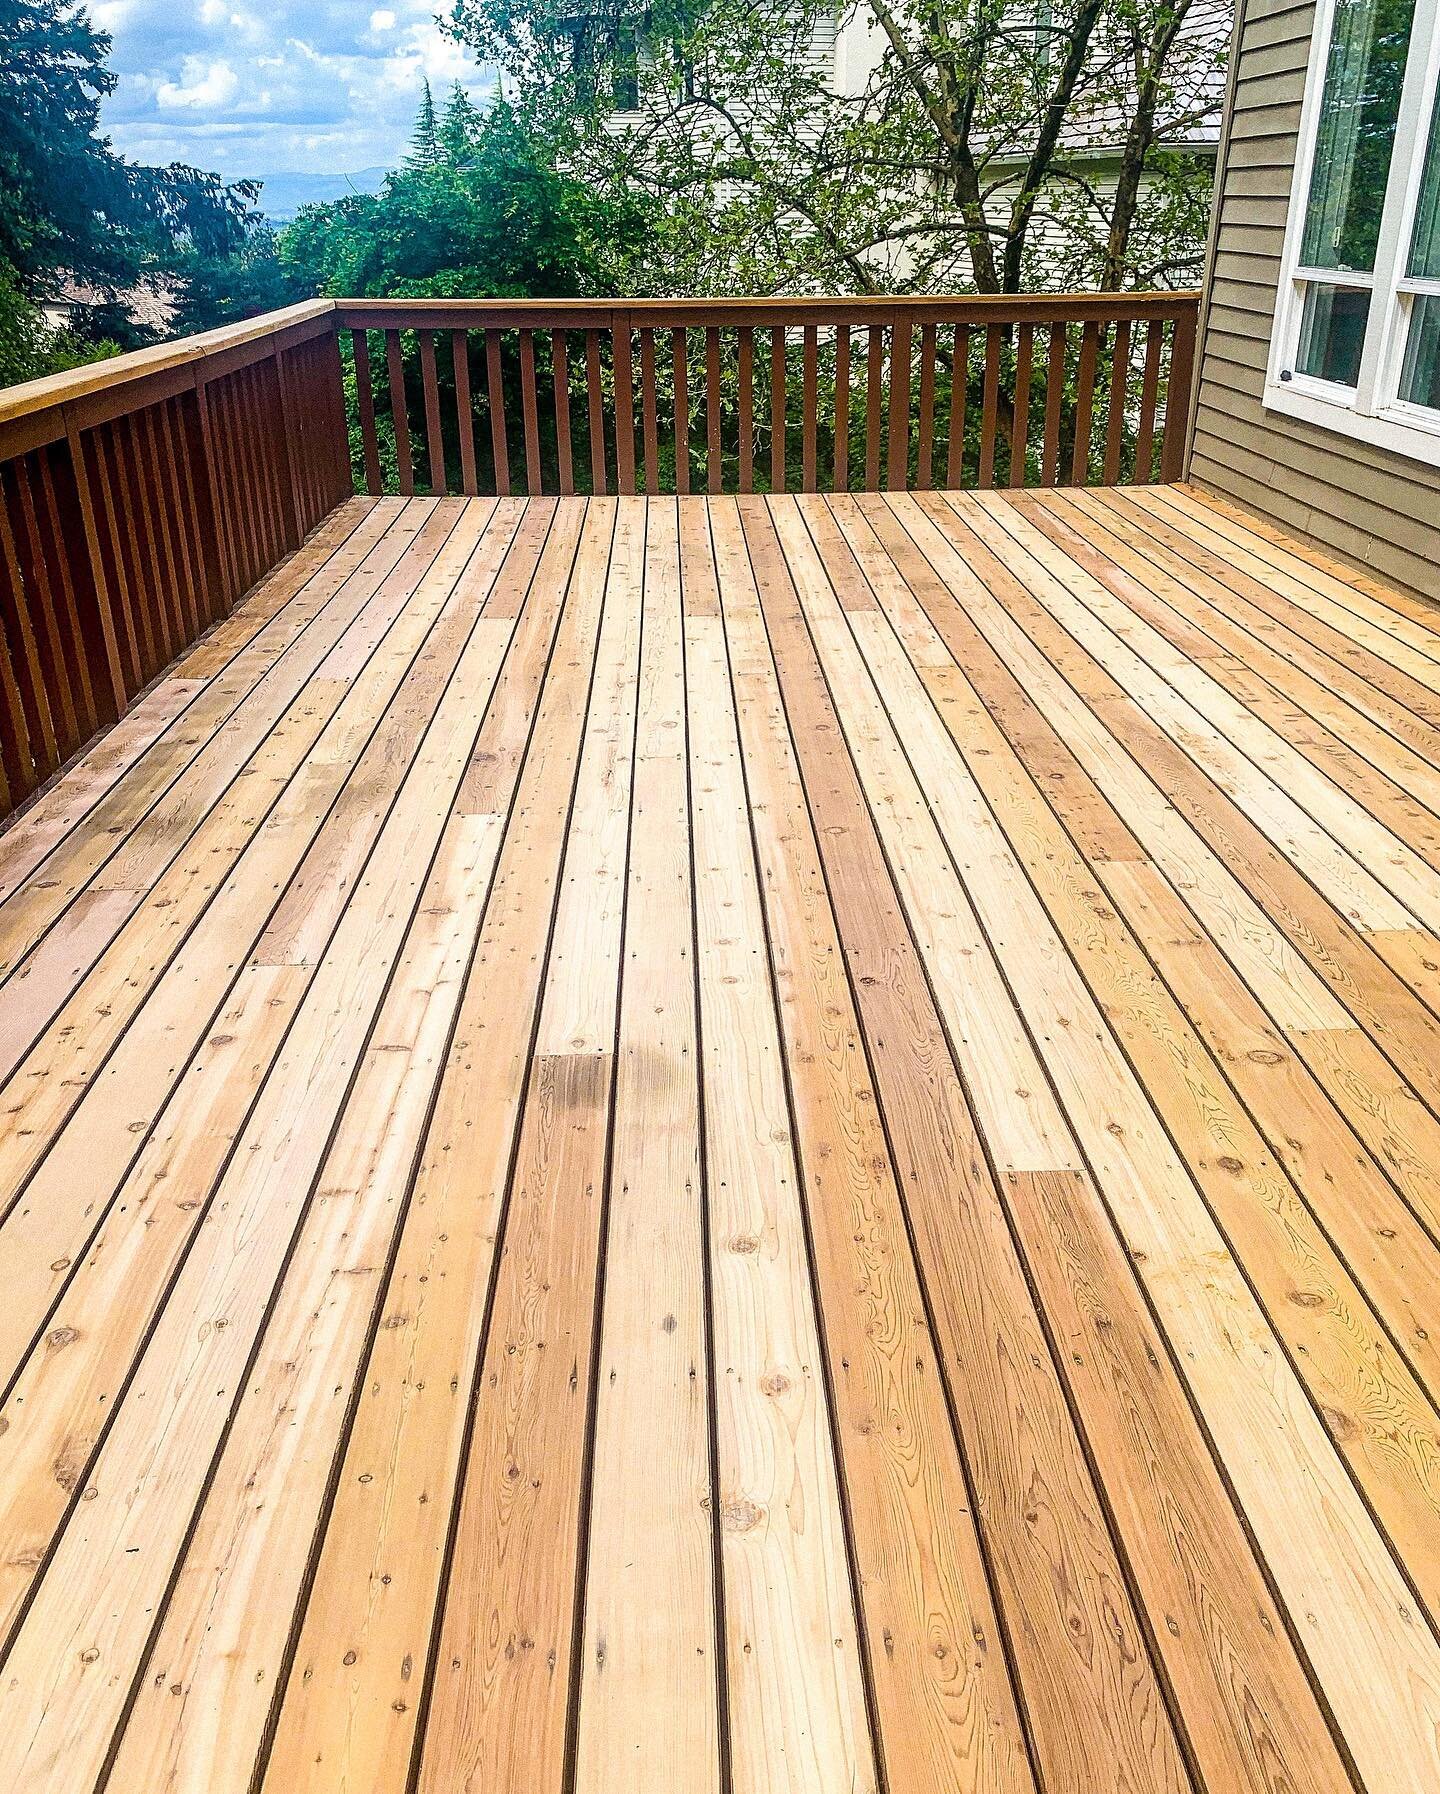 Another before and after. We love transforming a deck like this that looks like it needs to be rebuilt. Let us help you transform the floor in your home. .
.
.
.
.
#nwprohardwood #hardwoodrefinishingportland #flooring #freeestimates #portlandsmallbus